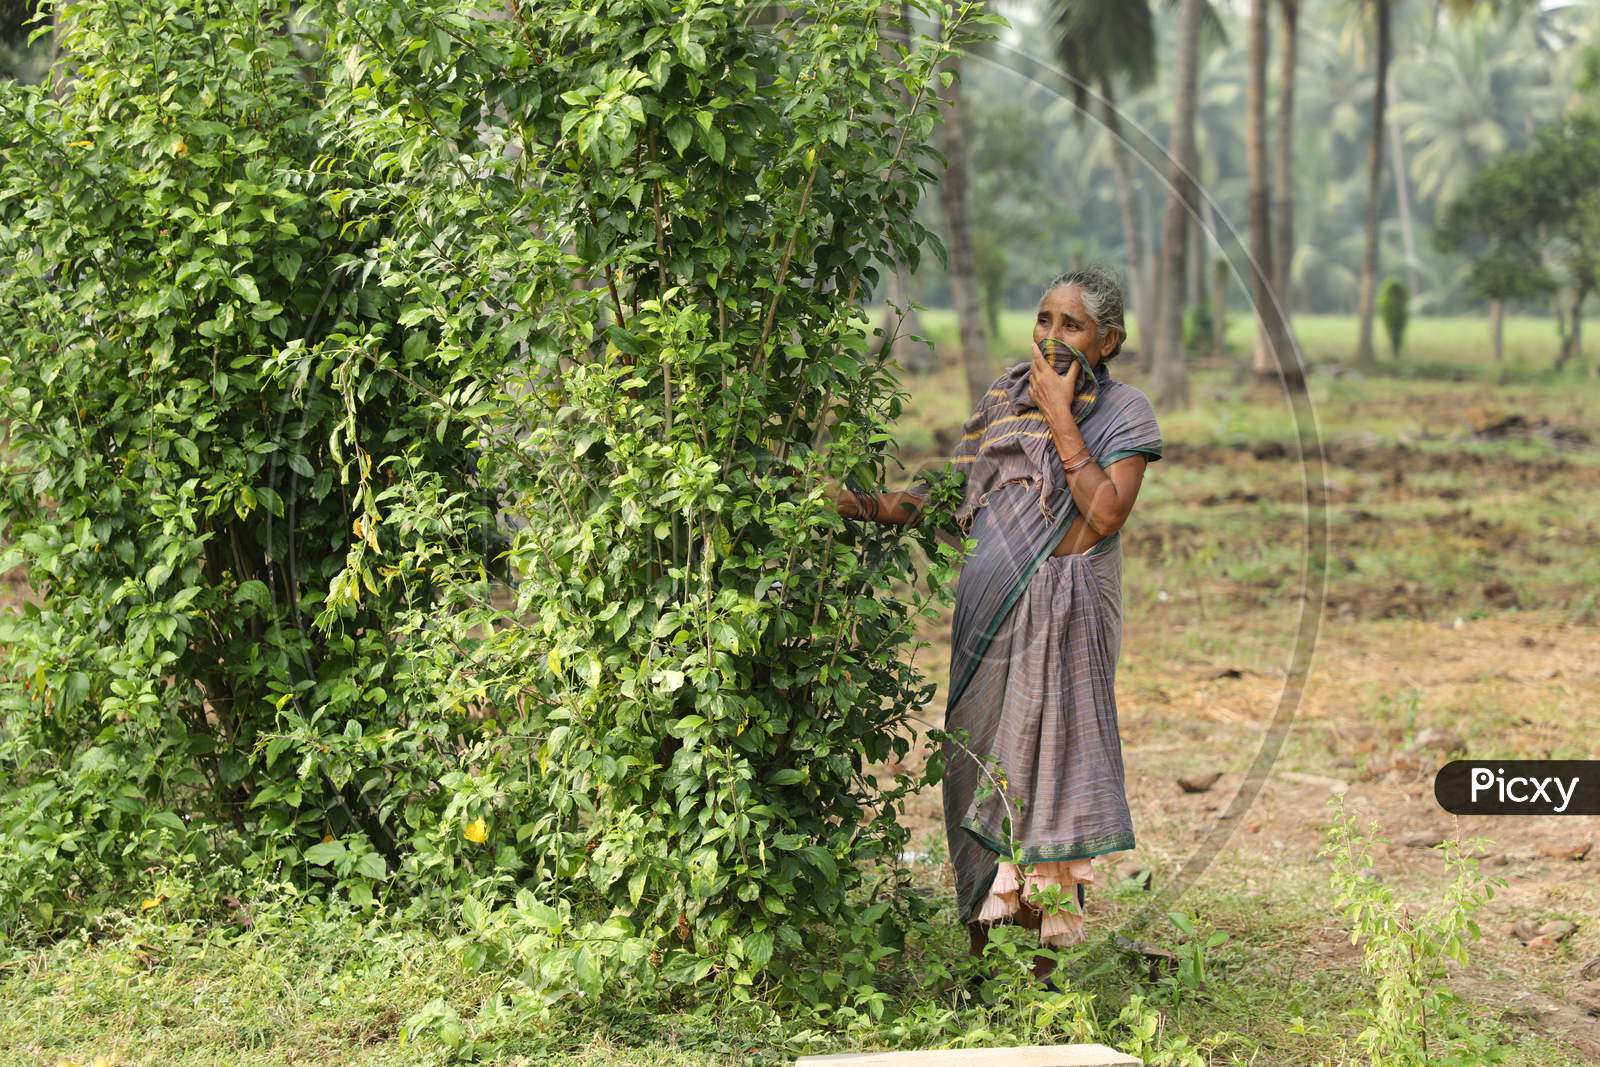 Old Women at rural area